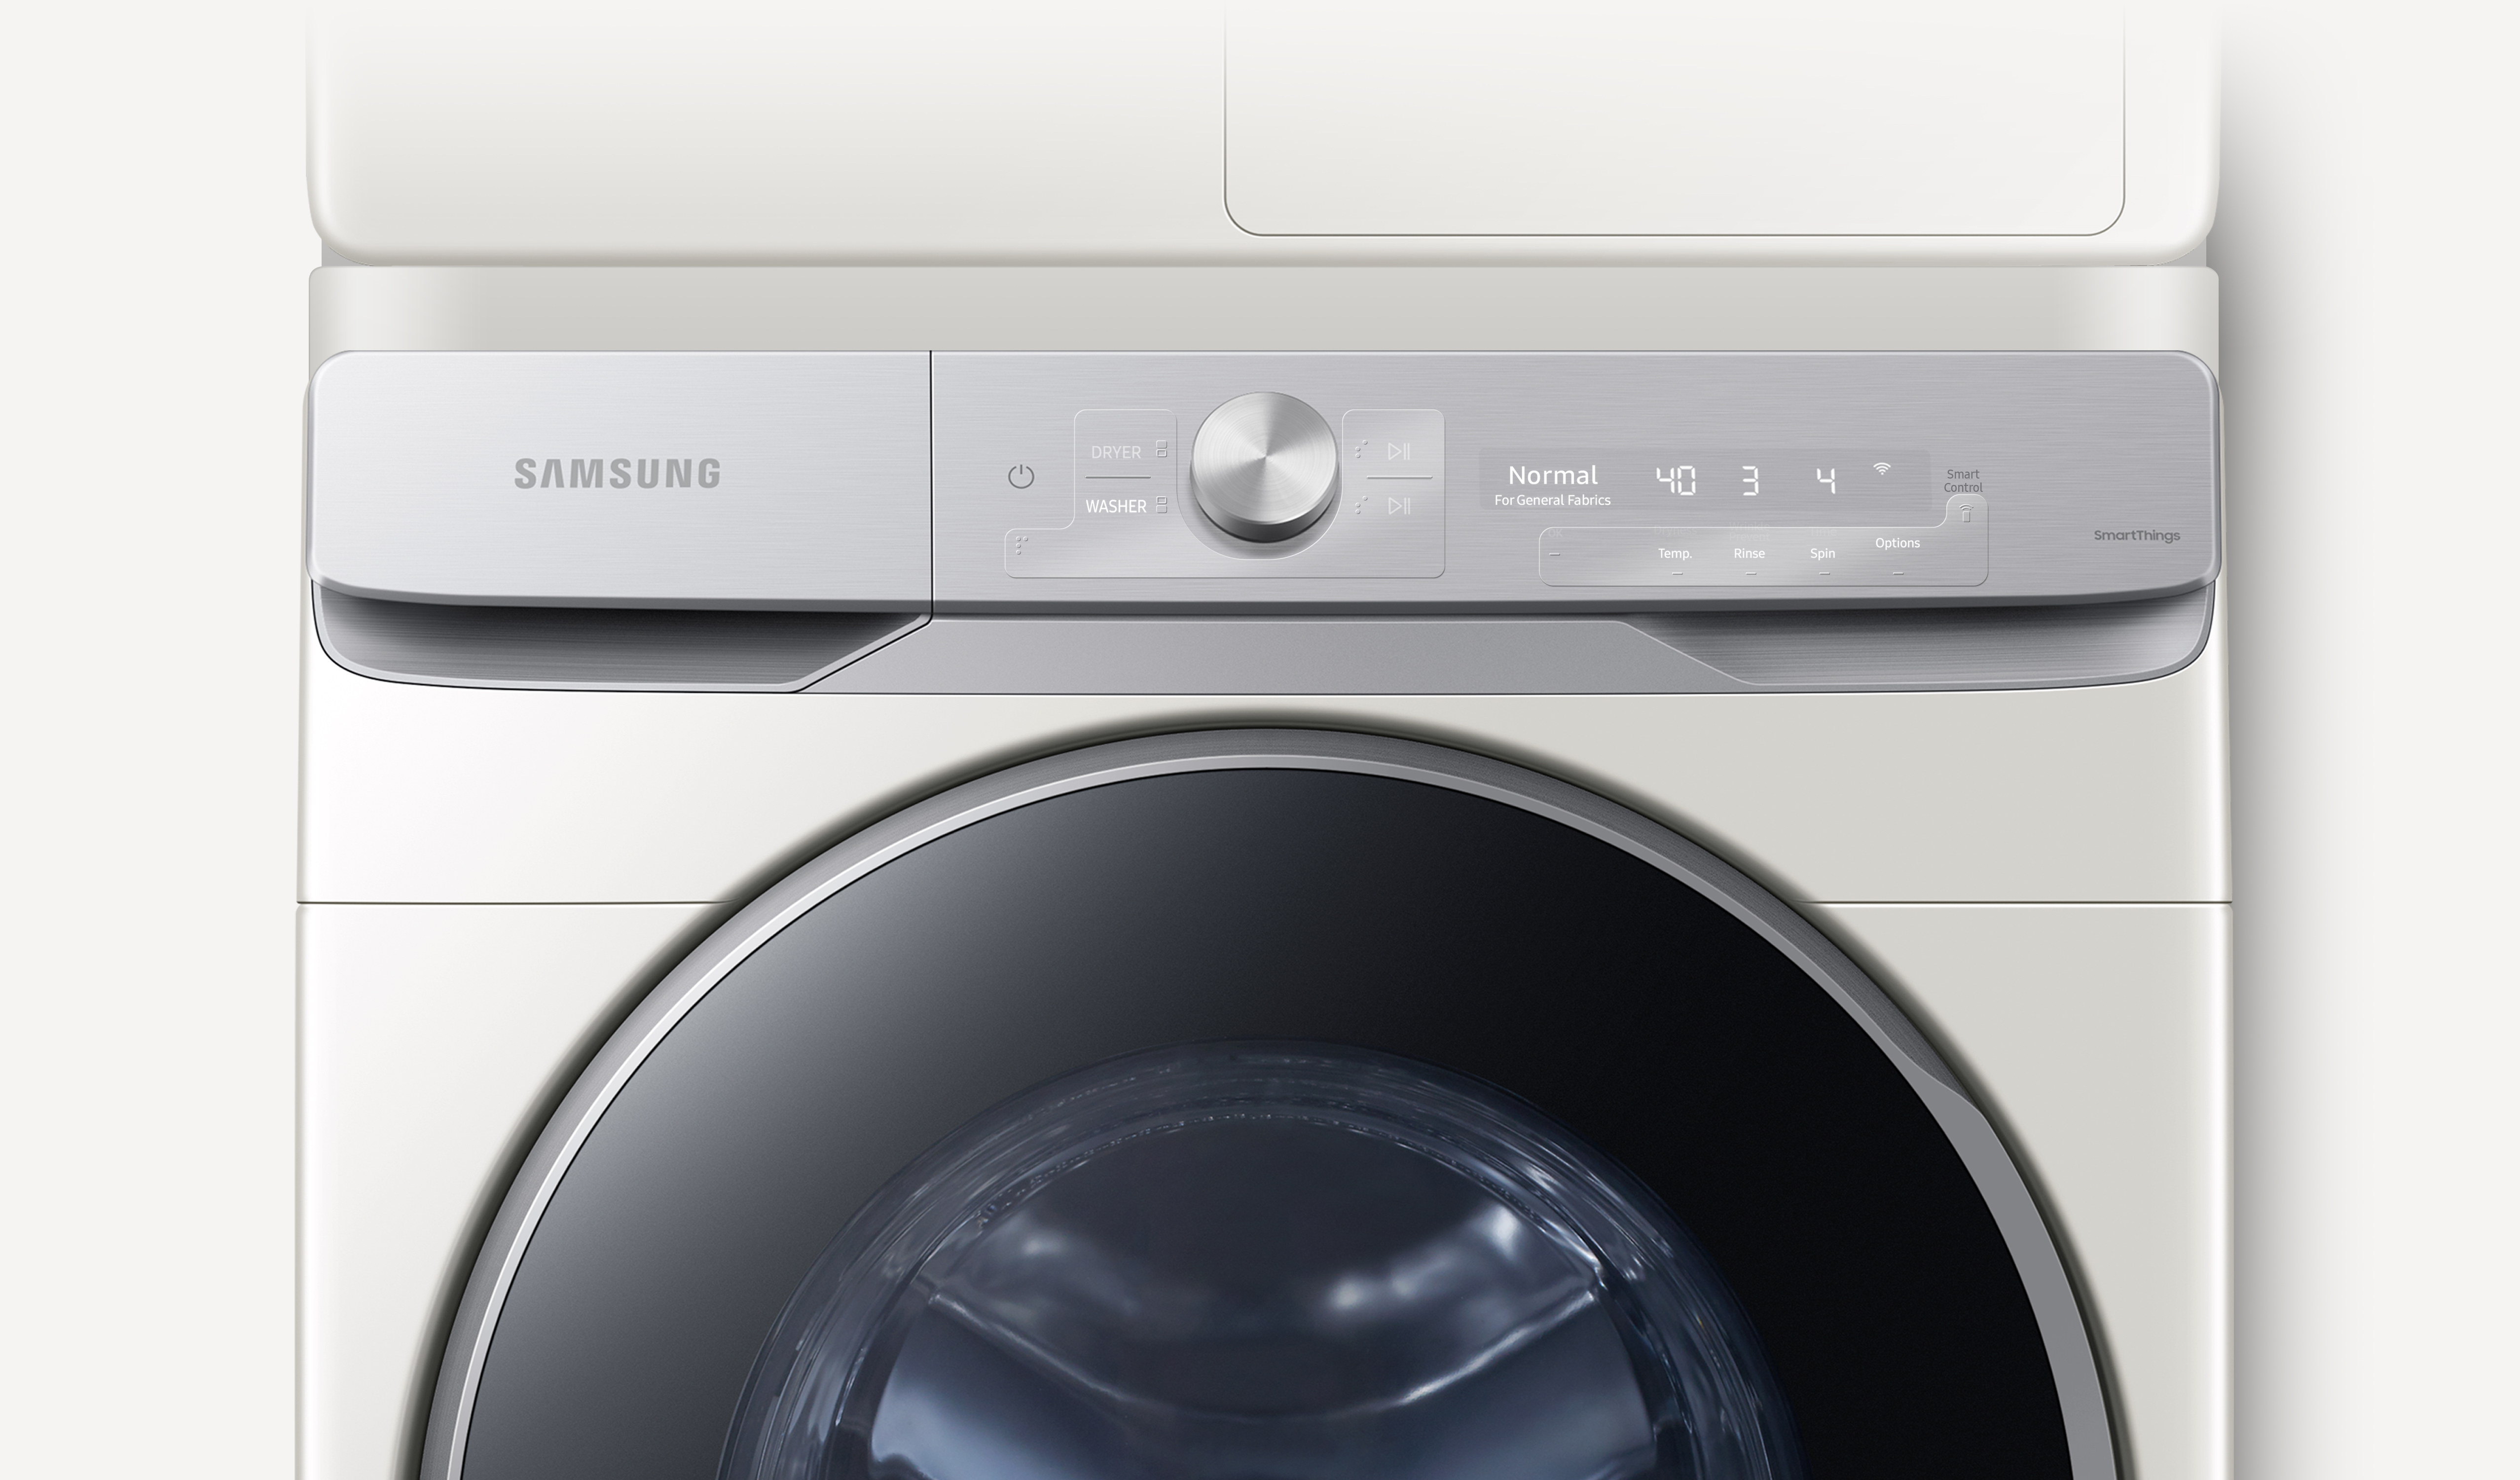 Grande AI - Accessible Washer & Dryer